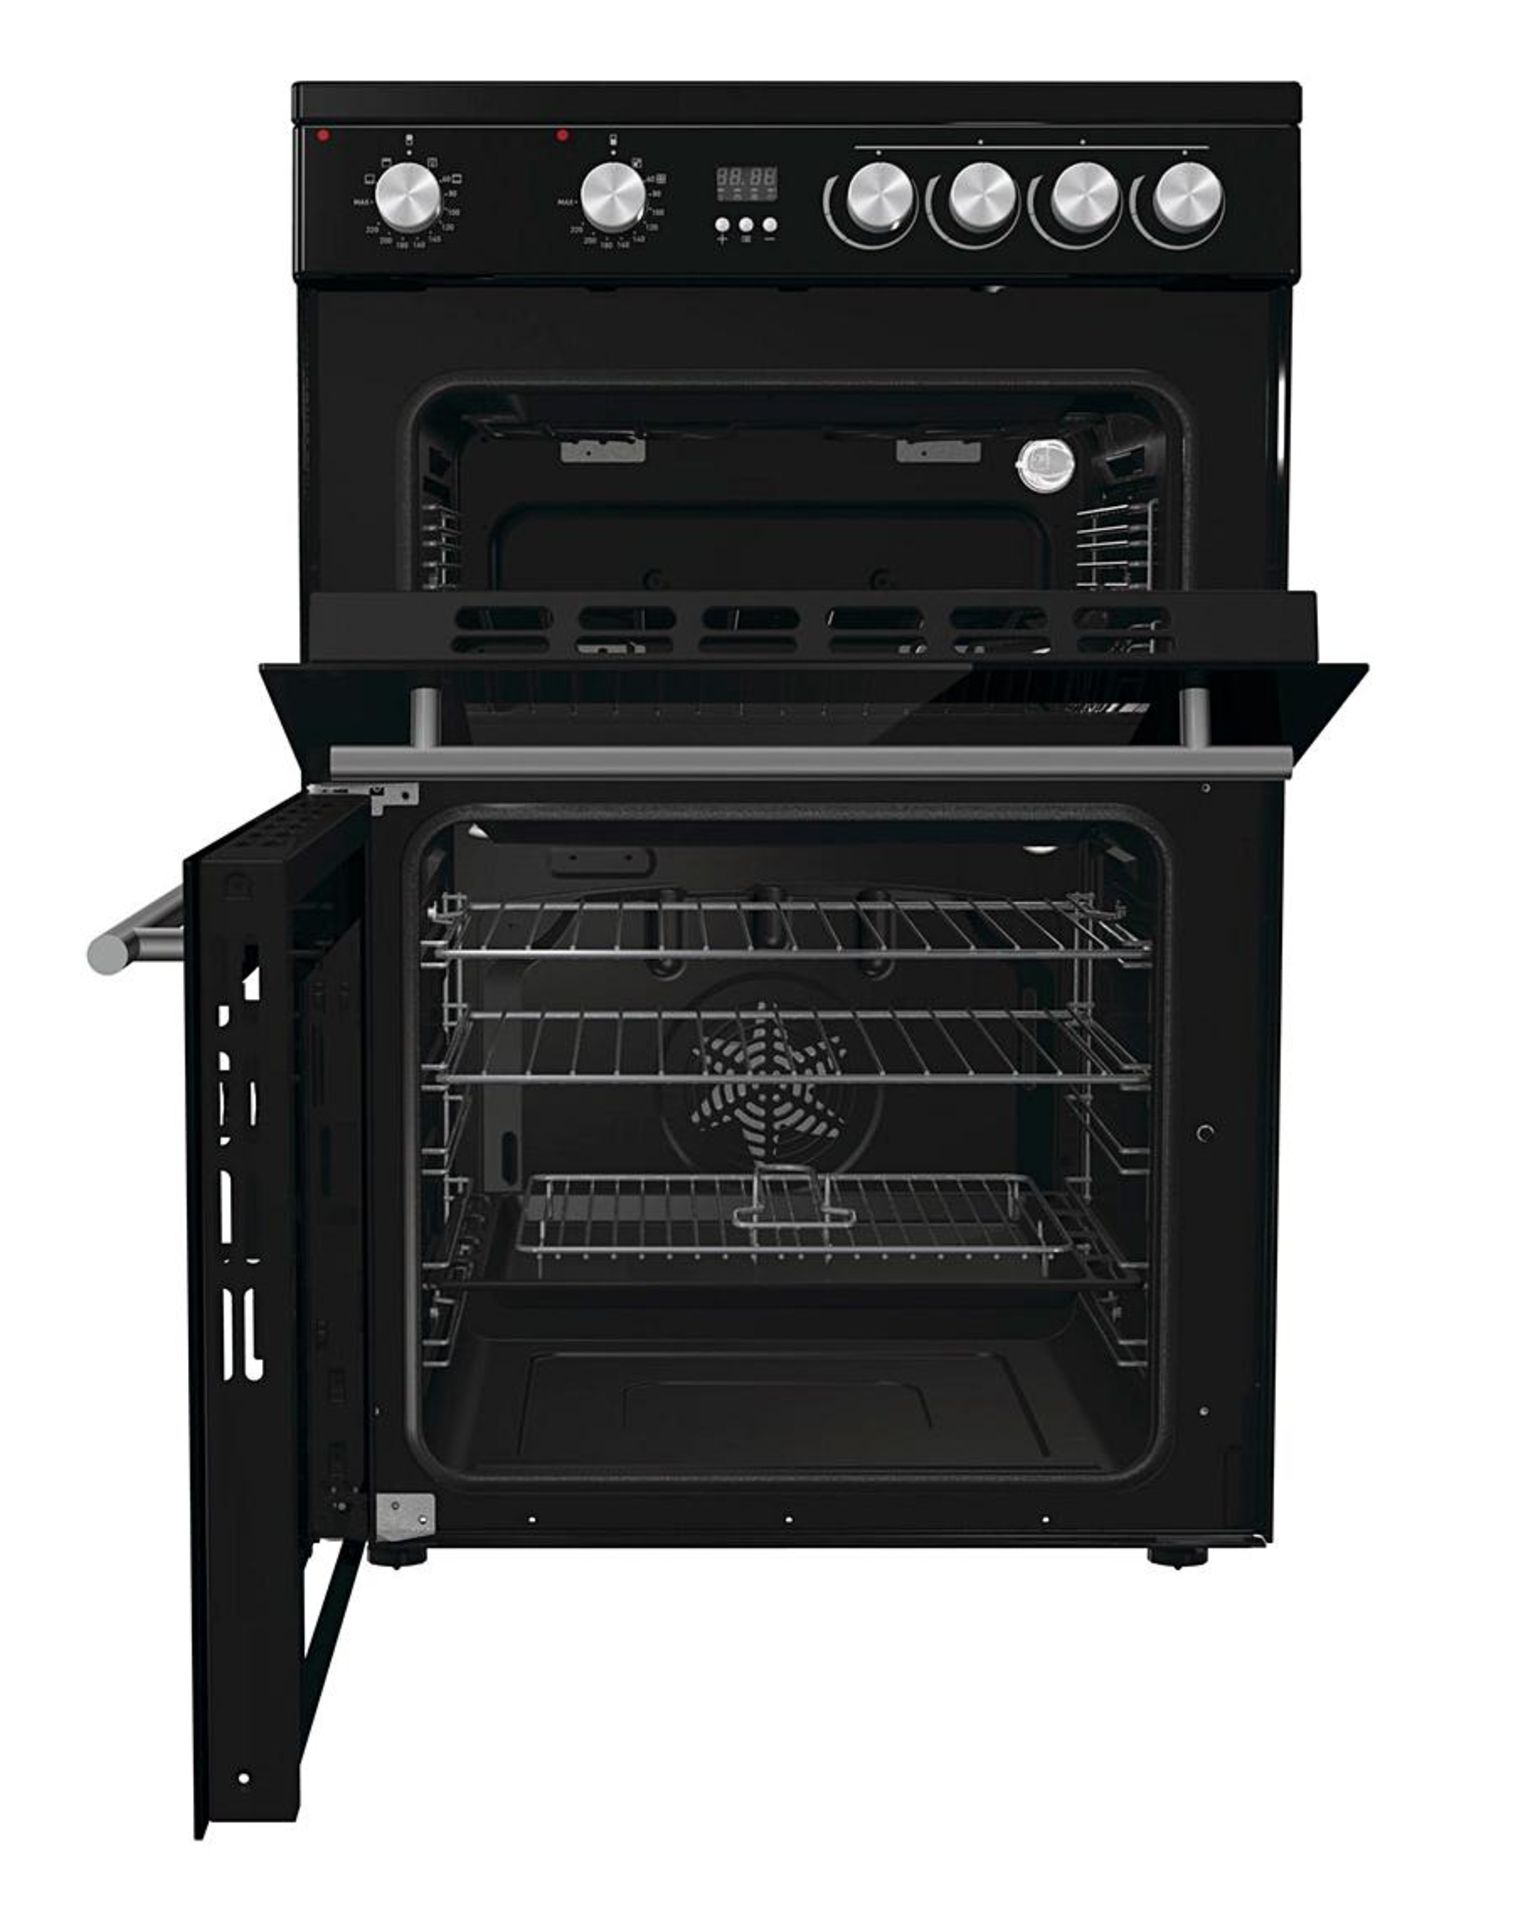 Hisense HDE3211BBUK Freestanding Electric Cooker - Black. RRP £749.99. 2 cavities including a main - Image 2 of 2